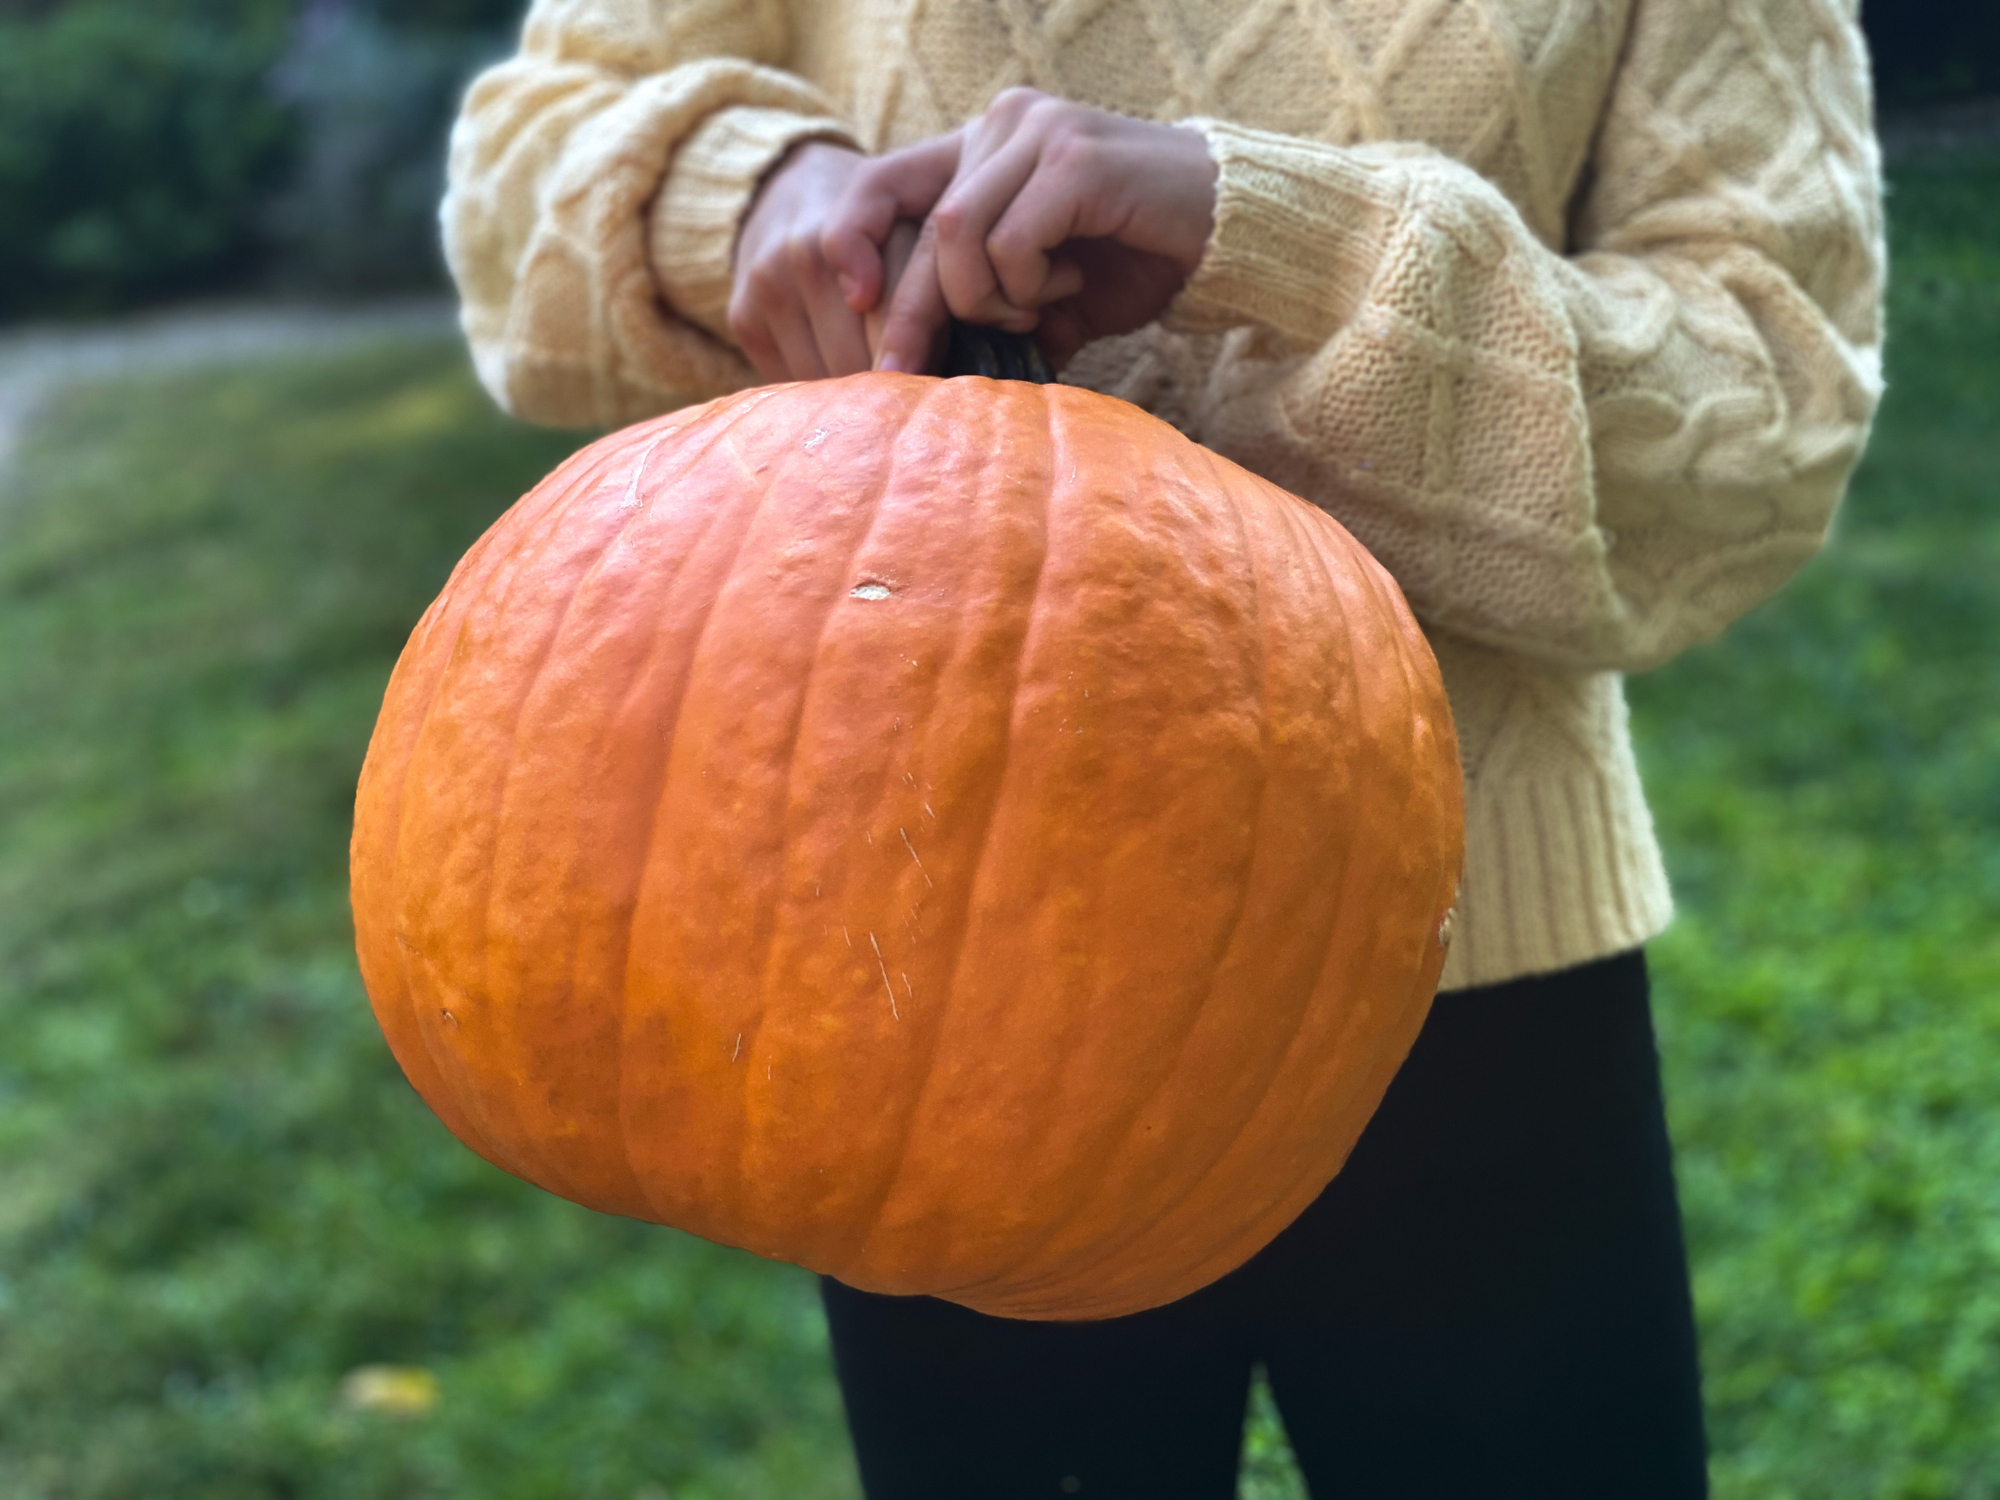 Person holding a large pumpkin in front of them.
